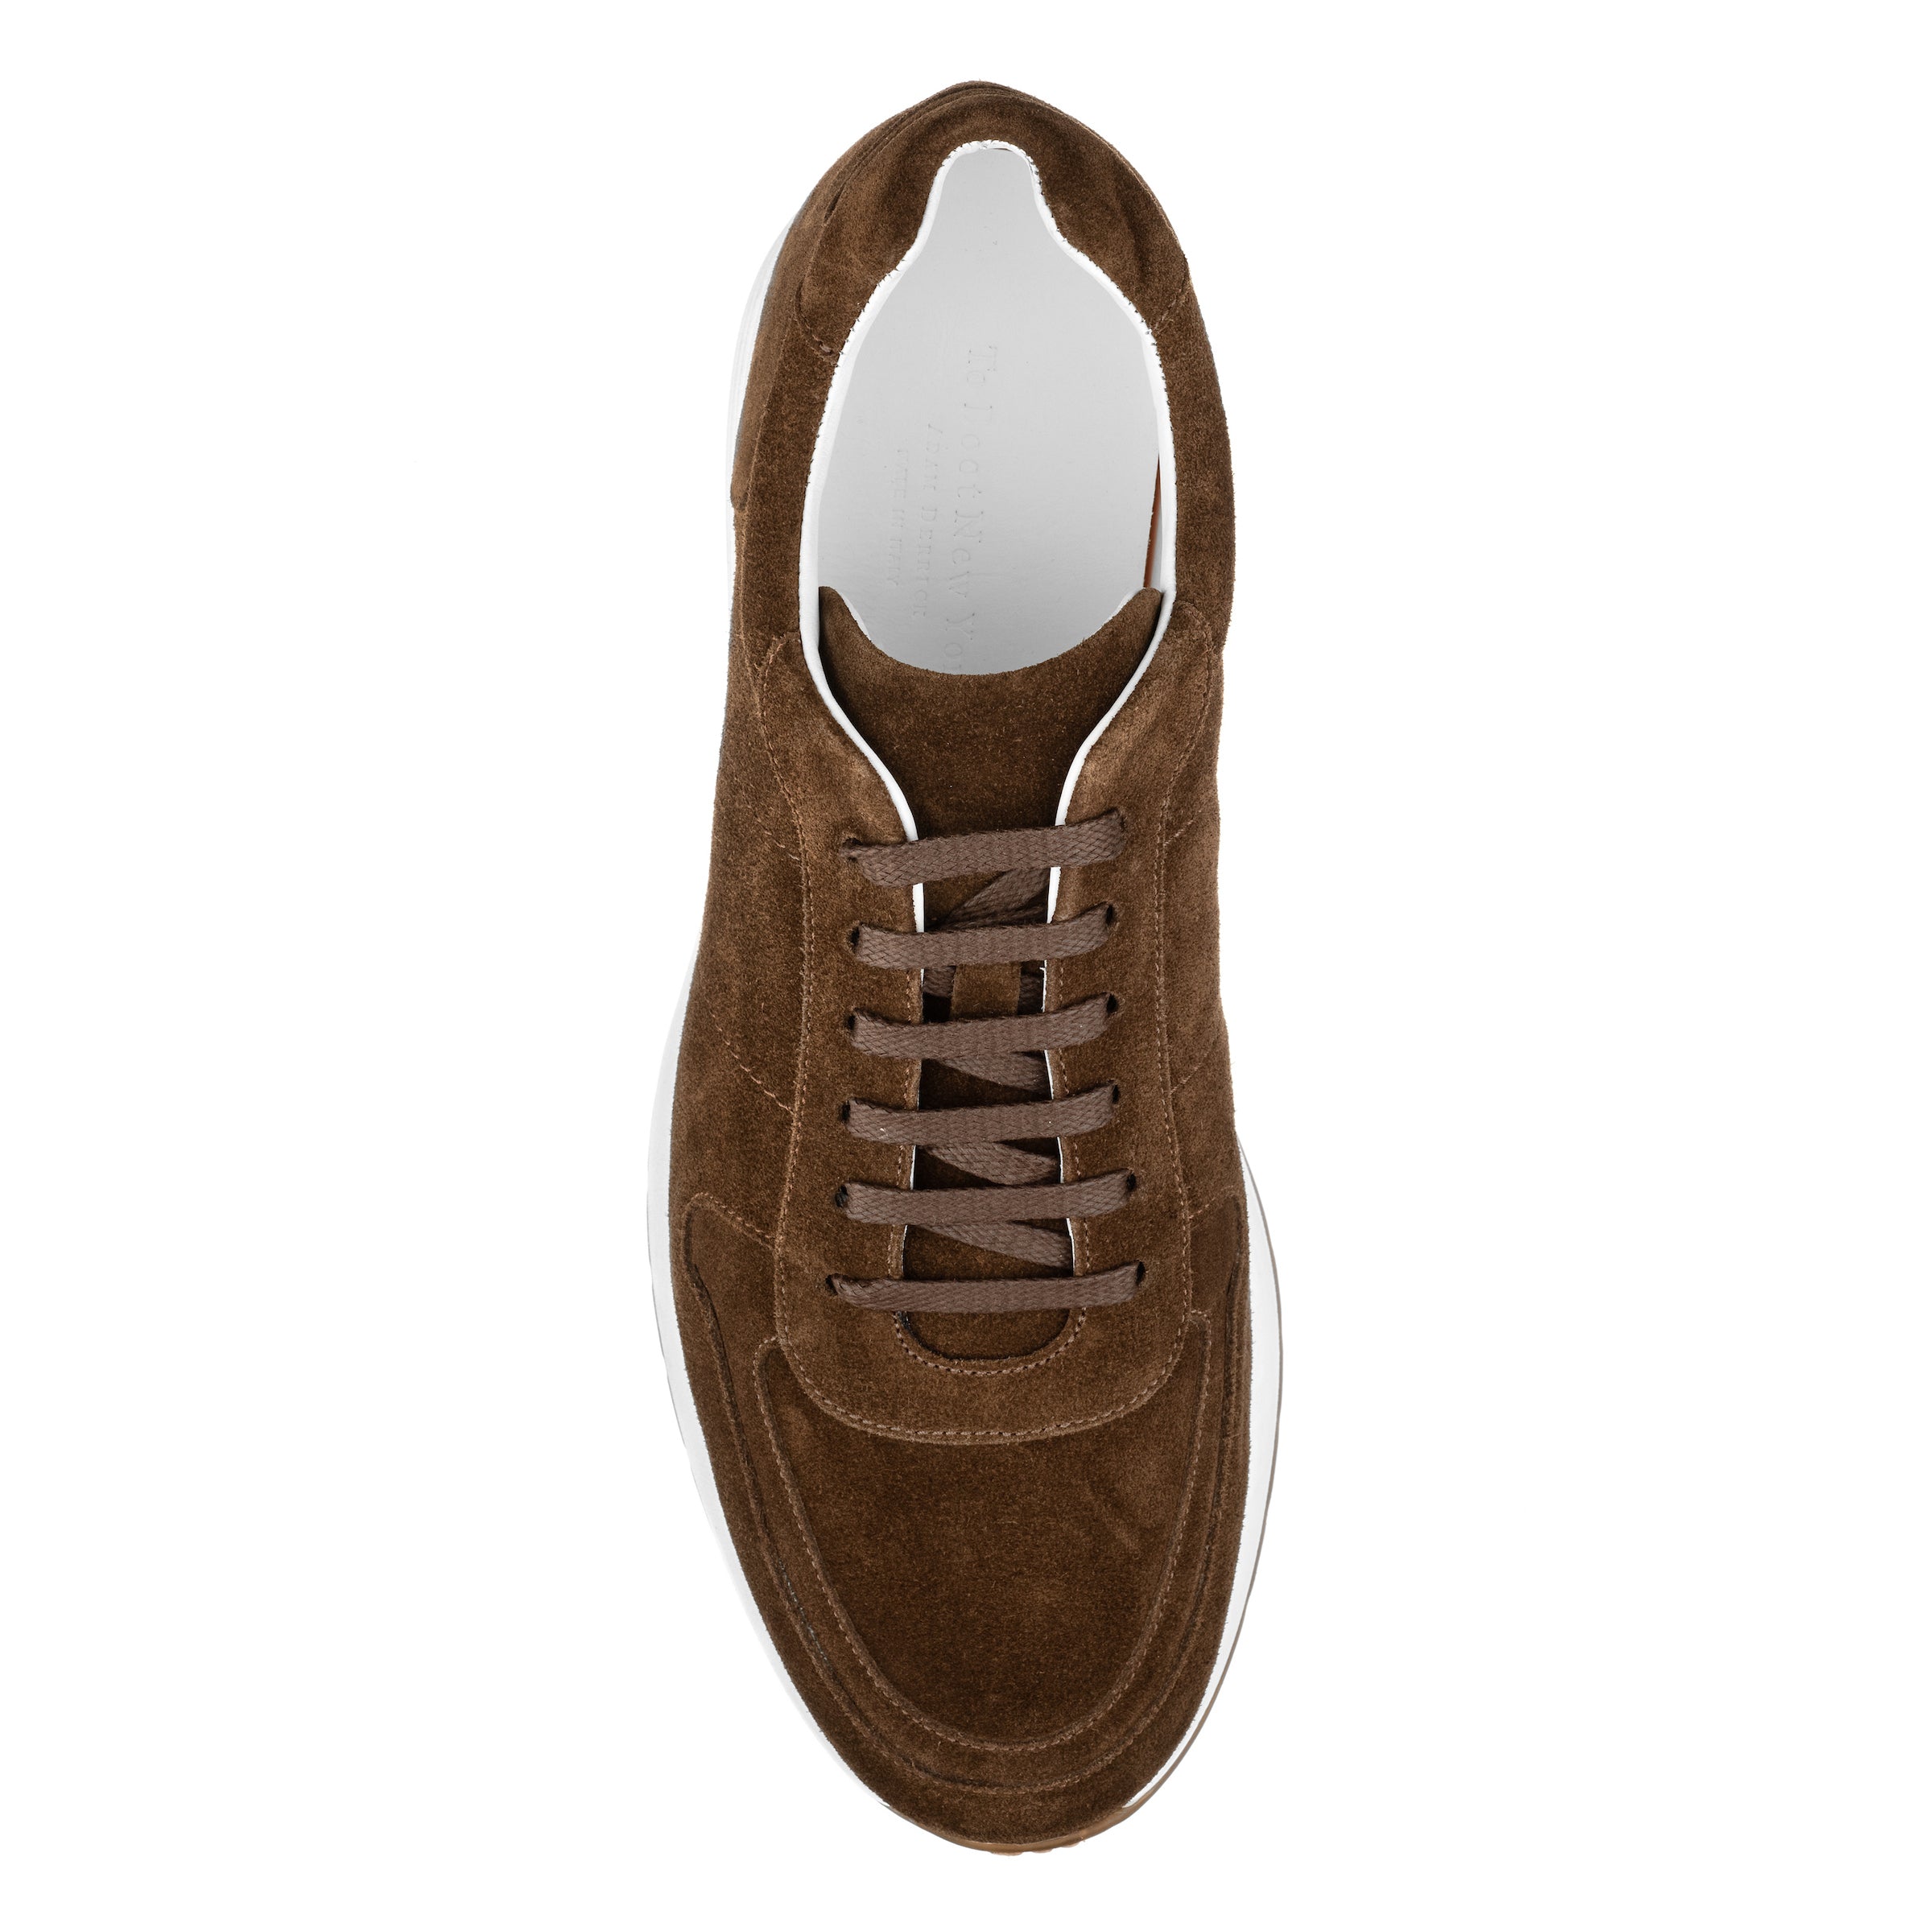 Forest Mid Brown suede